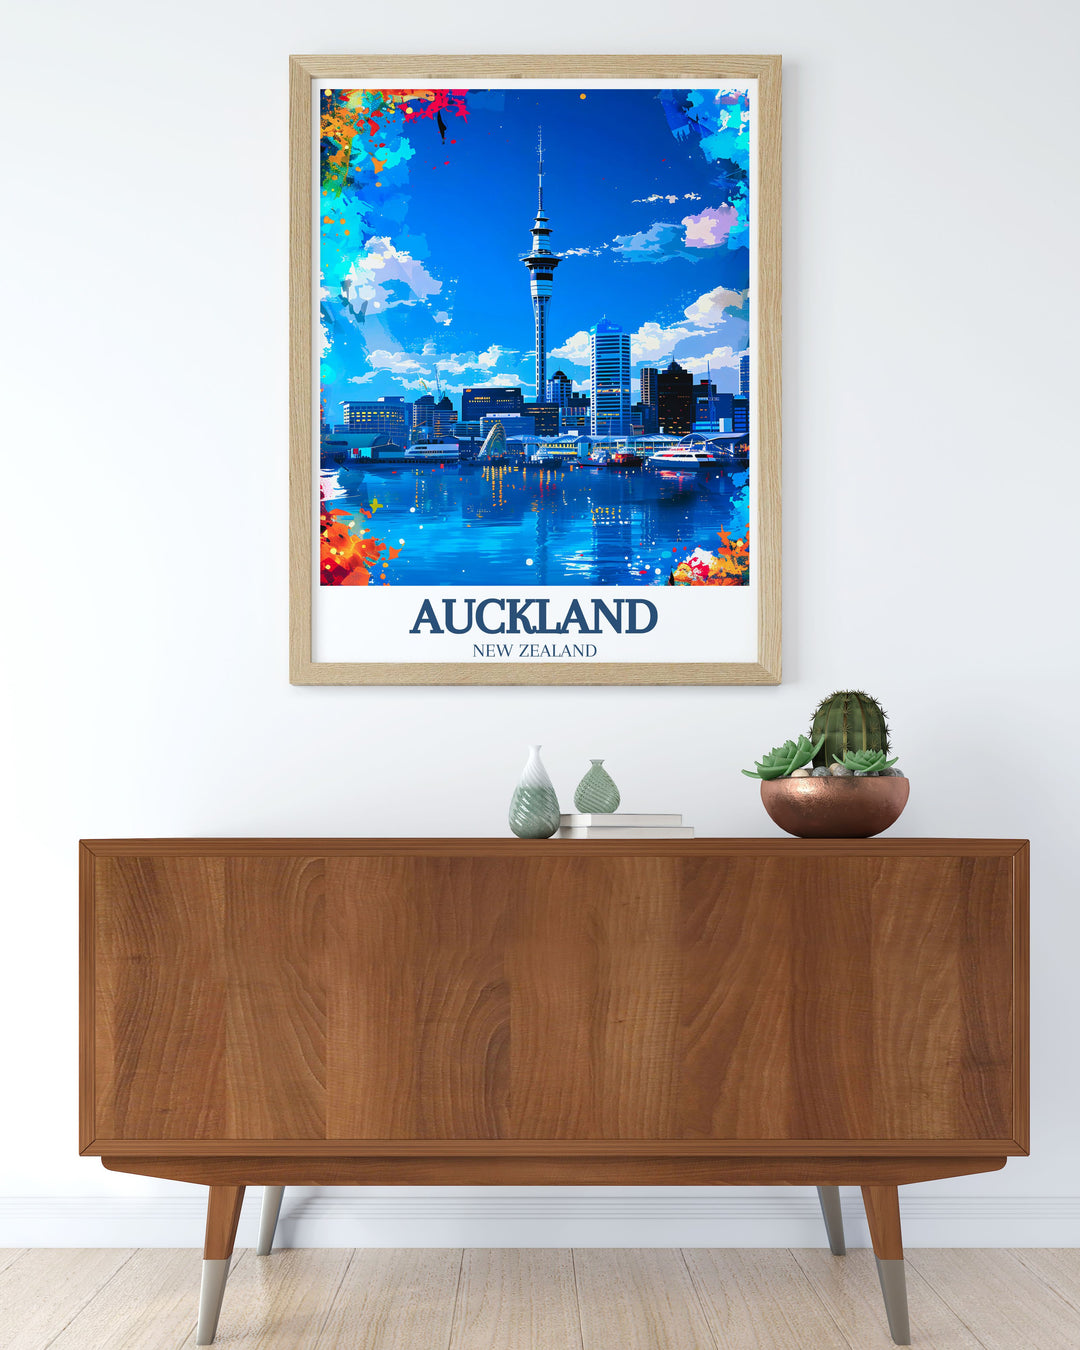 High quality New Zealand poster of the Sky Tower, the tallest freestanding structure in the Southern Hemisphere. This artwork captures the architectural marvel and offers a stunning view of Aucklands dynamic cityscape, perfect for home or office decor.